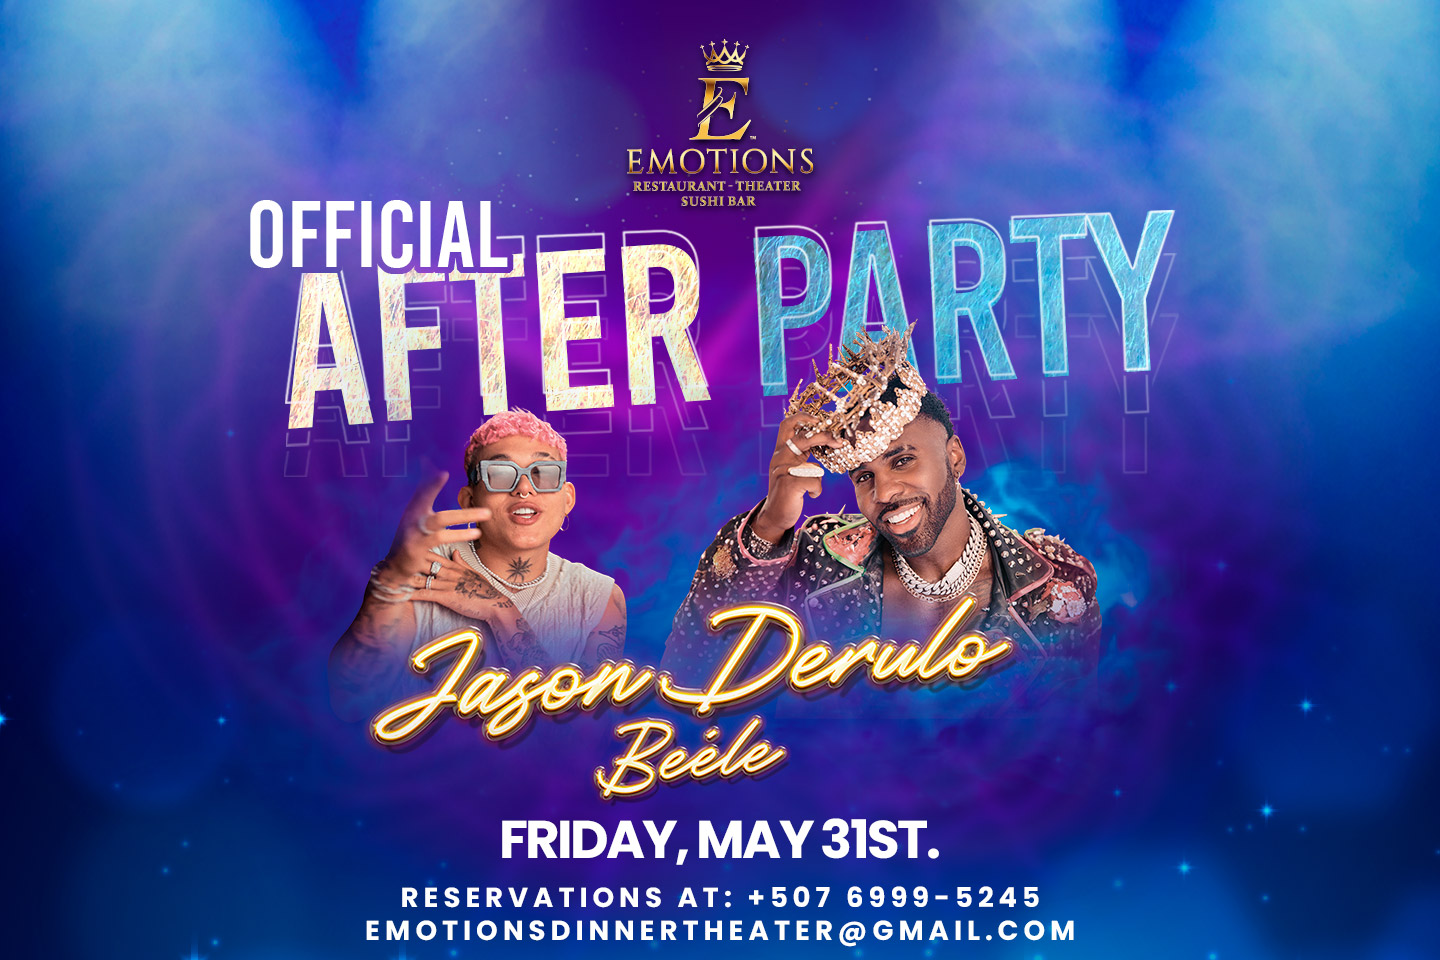 31 MAY AFTER PARTY JASON DERULO AND BEELE CONCERT